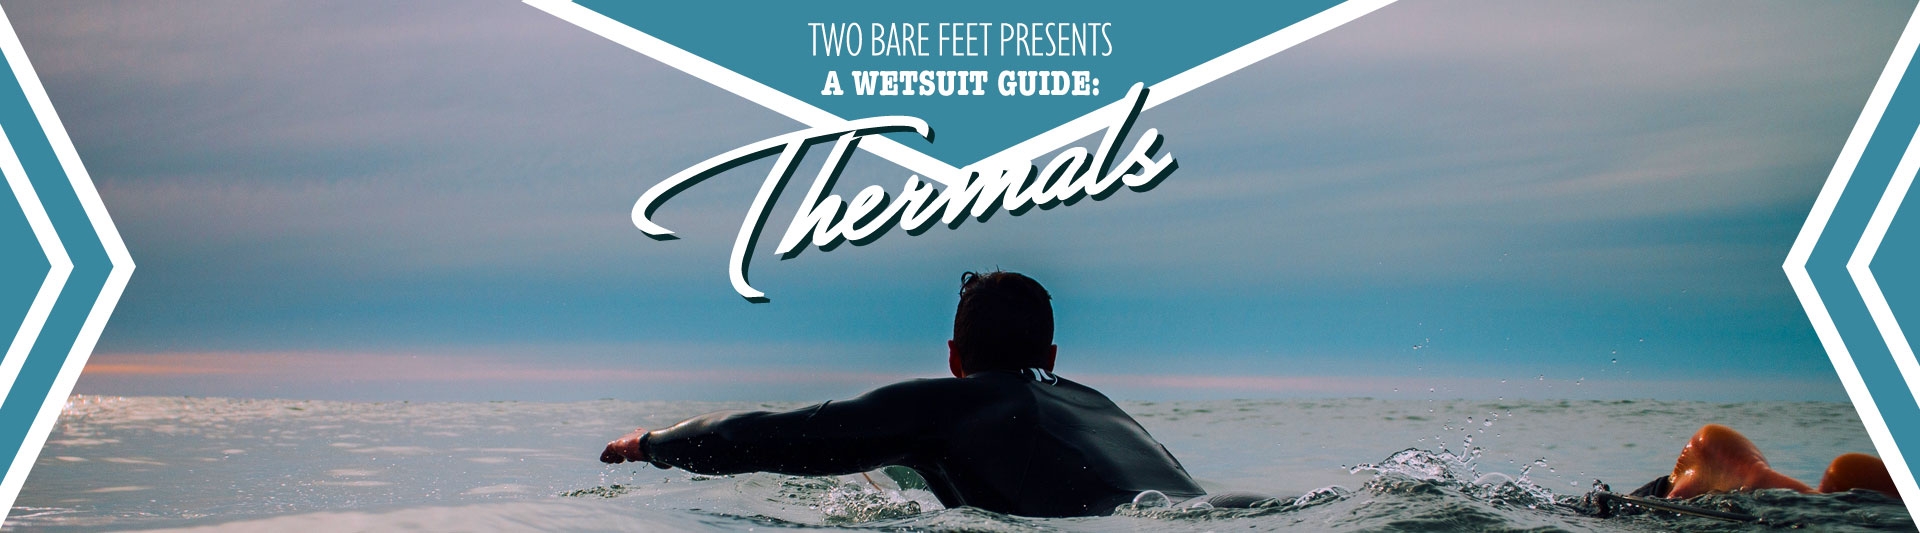 thermals banner